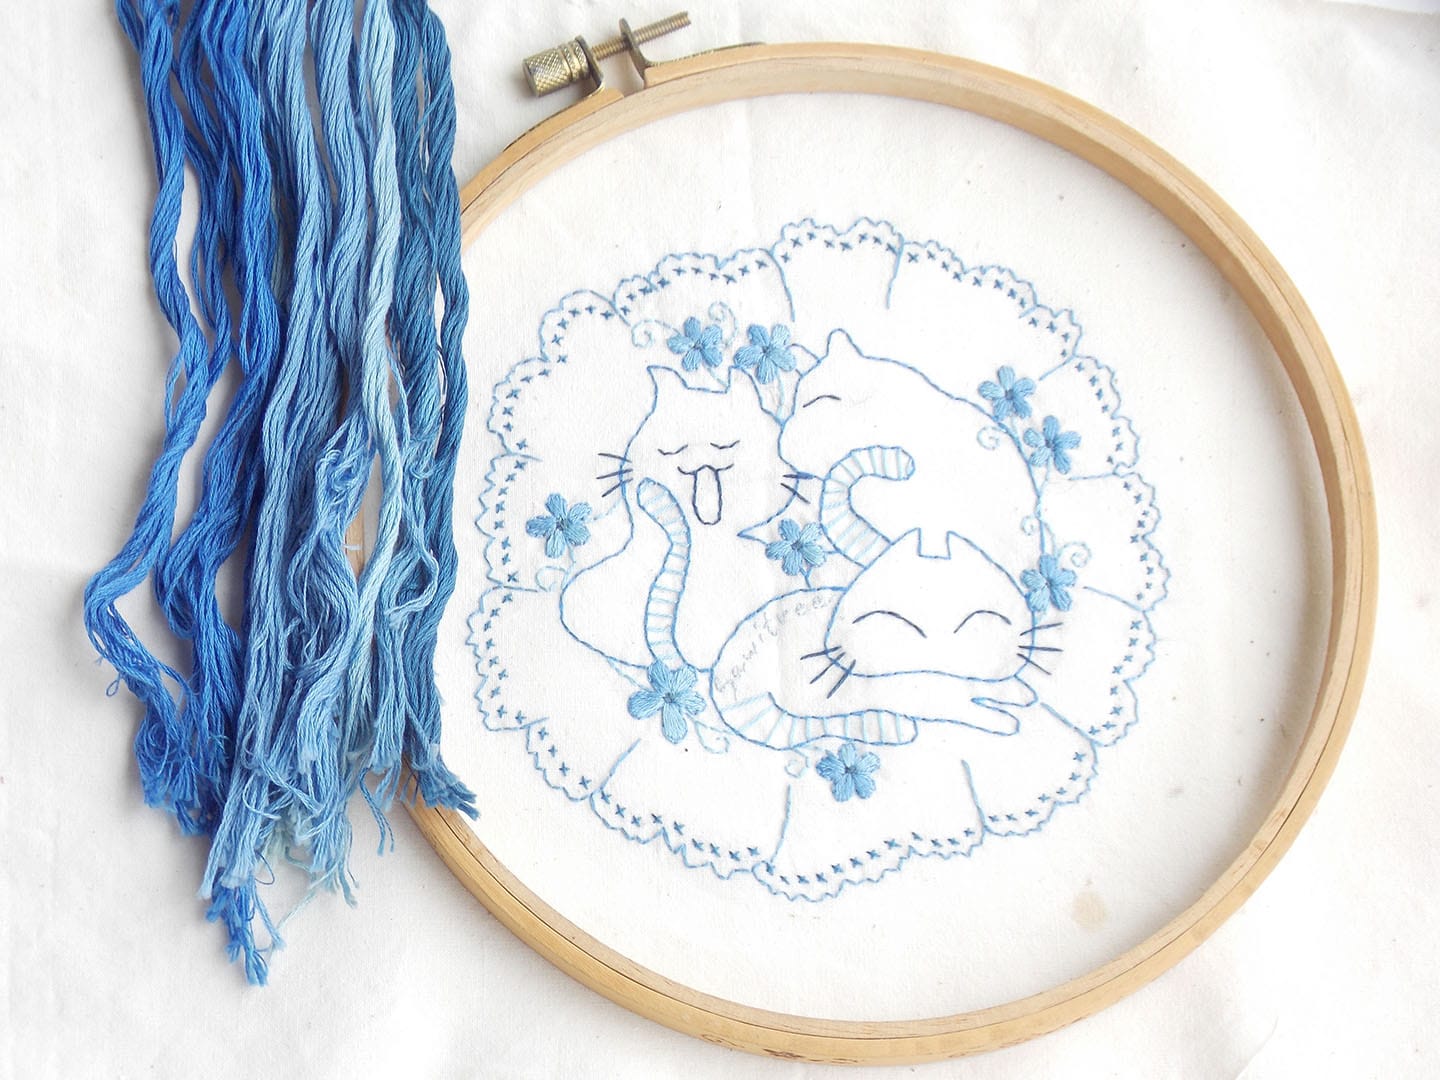 Embroidery Frame - mollypg